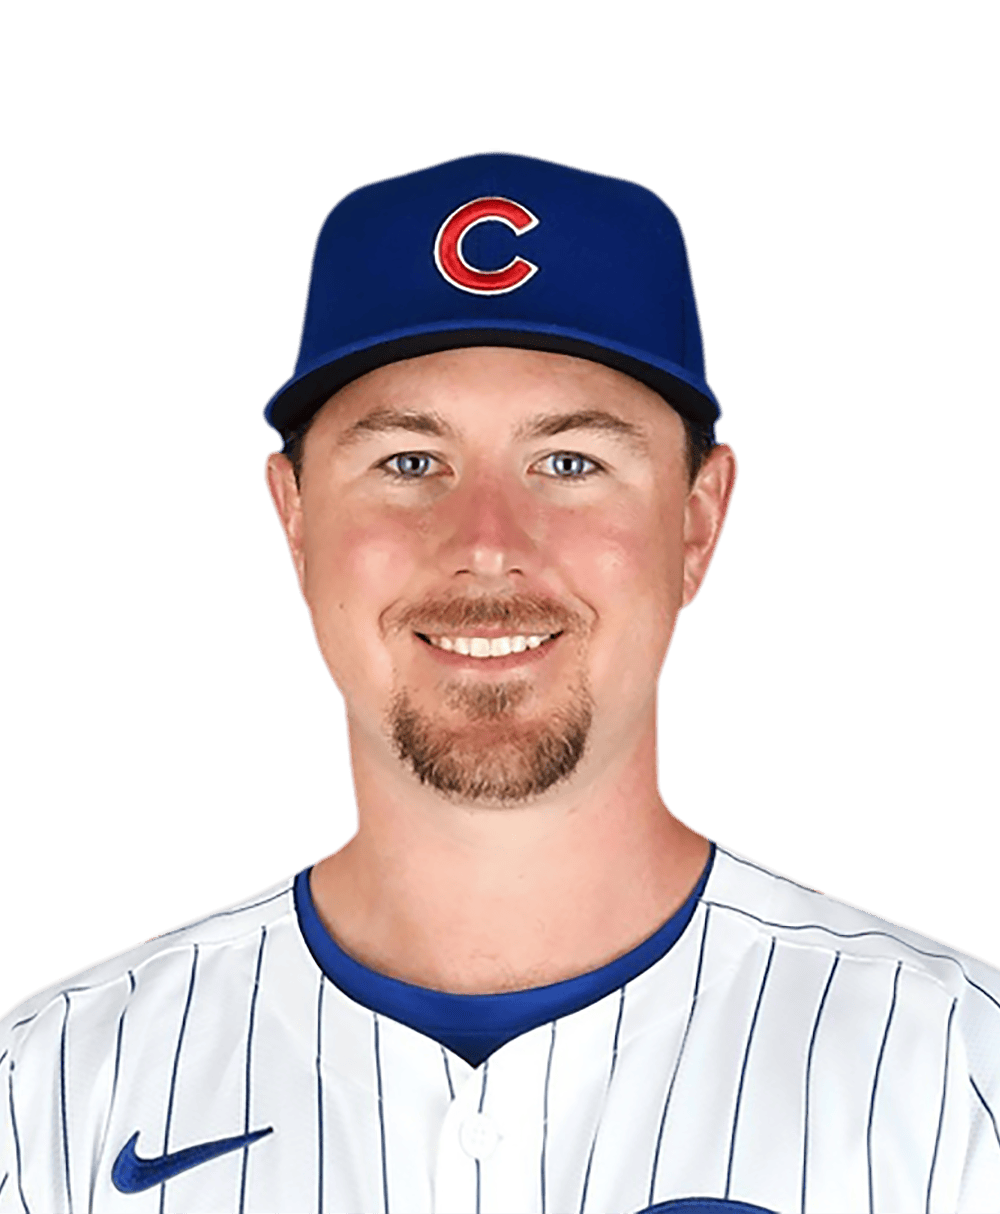 Chris Martin continues to leverage his value as an effective set